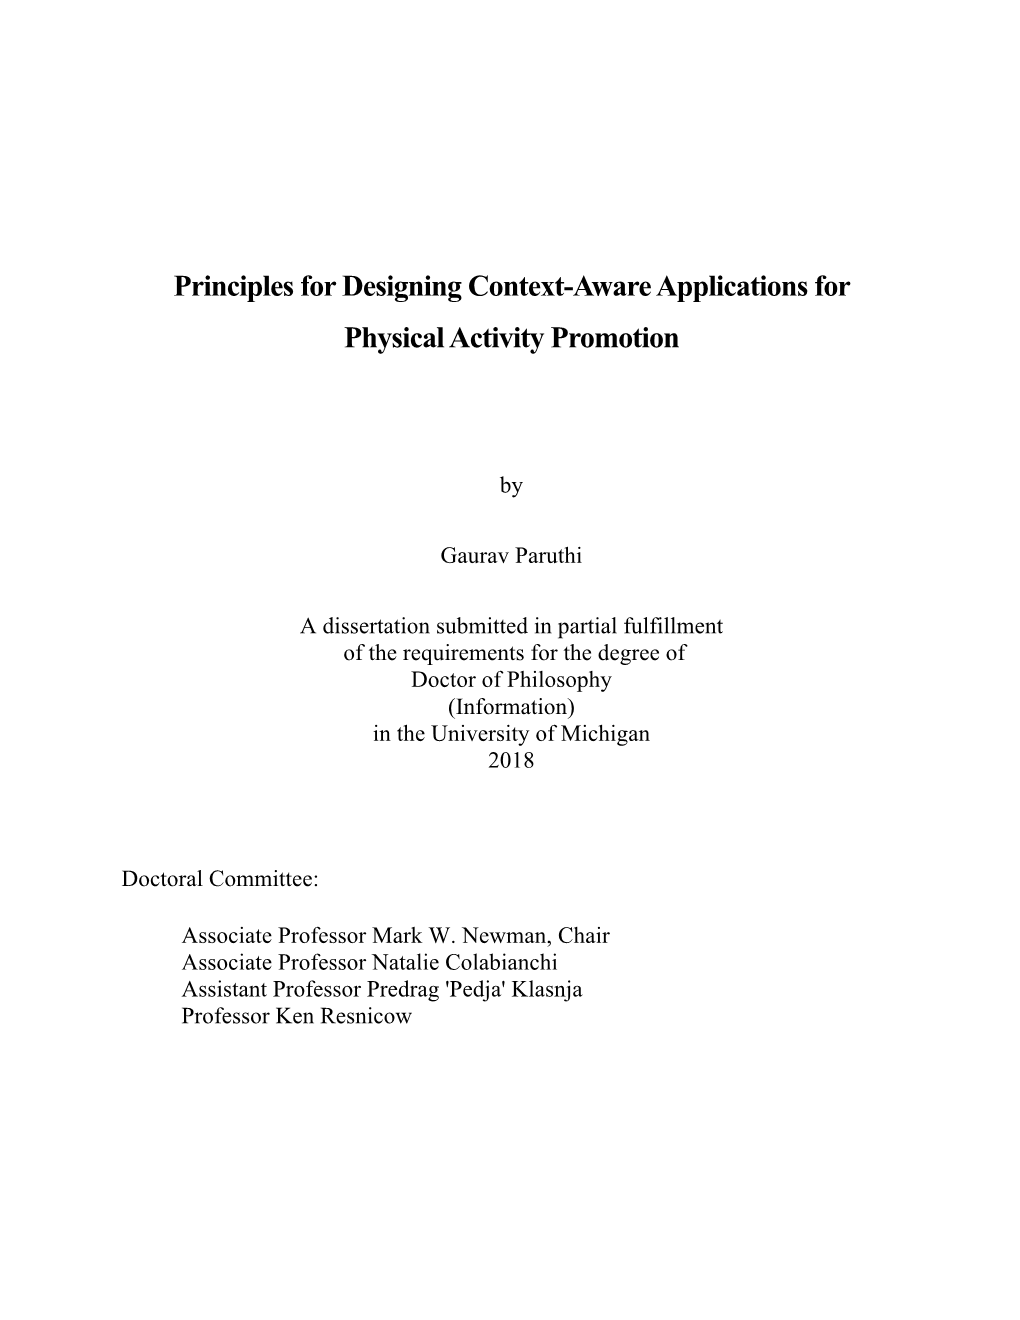 Principles for Designing Context-Aware Applications for Physical Activity Promotion